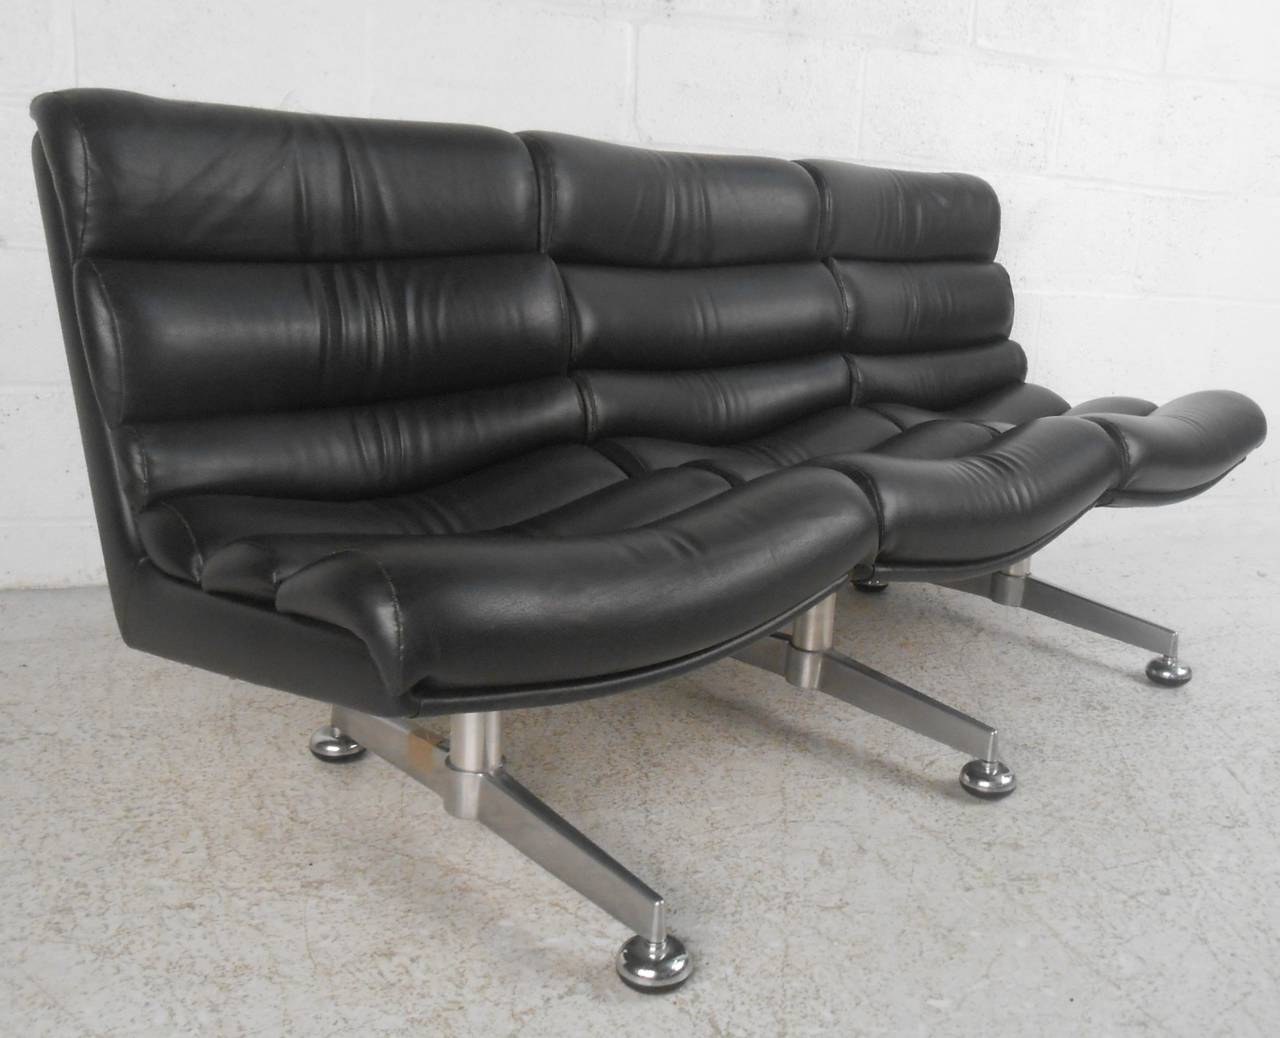 This unique three seat sofa is both wonderfully designed and well upholstered. Quality chrome base and unique construction make this the perfect seating solution for home or business. Please confirm item location (NY or NJ).